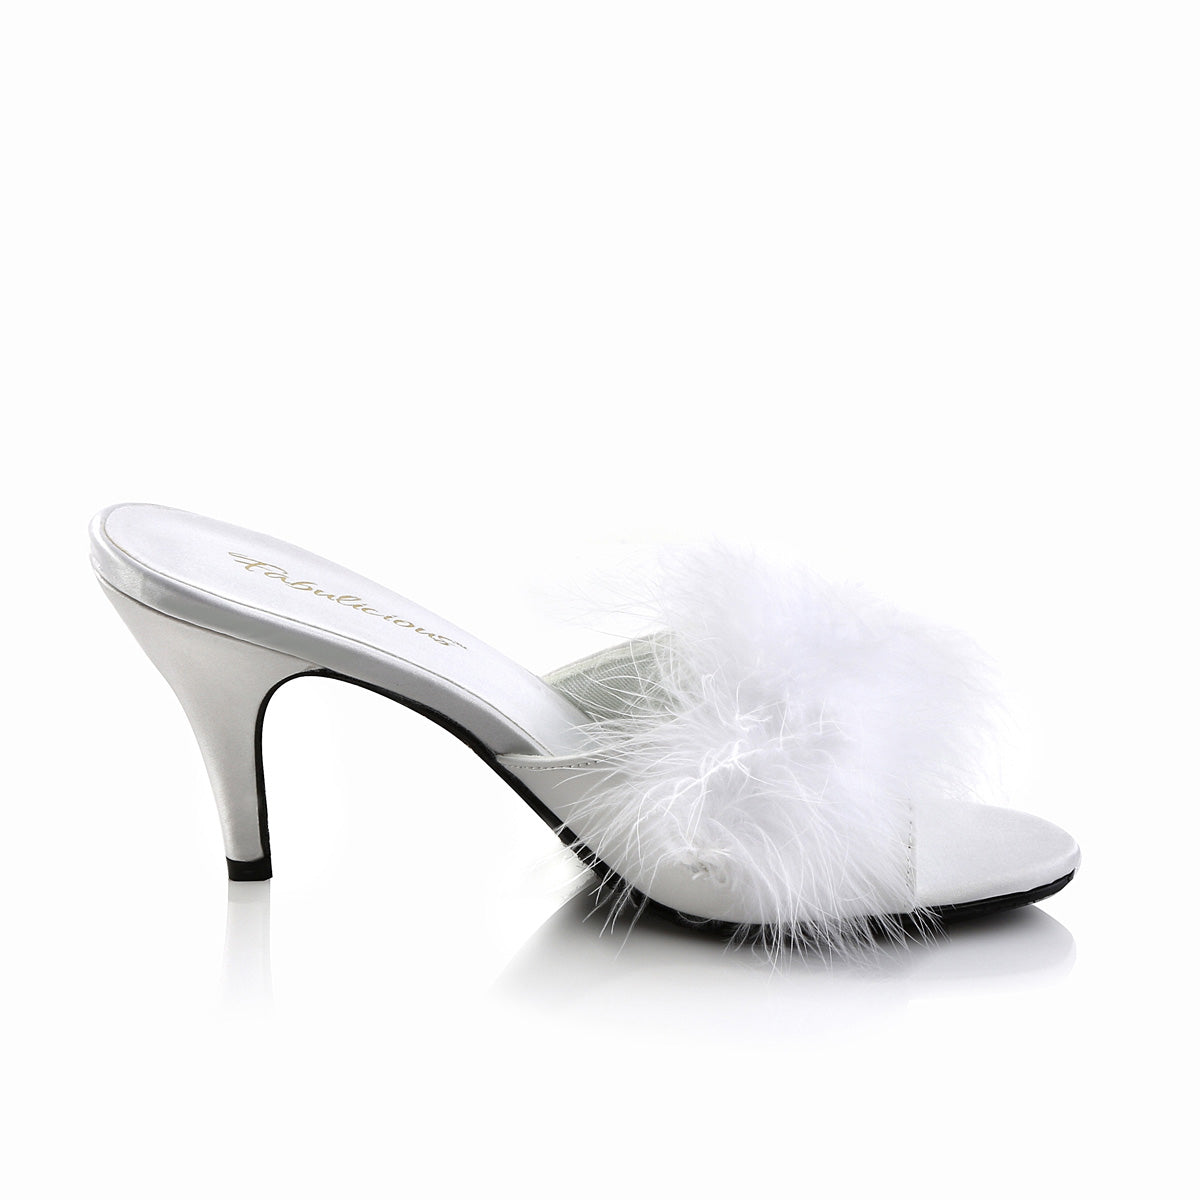 AMOUR-03 Fabulicious 3 Inch Heel White Faux Fur Sexy Shoes-Fabulicious- Sexy Shoes Fetish Heels